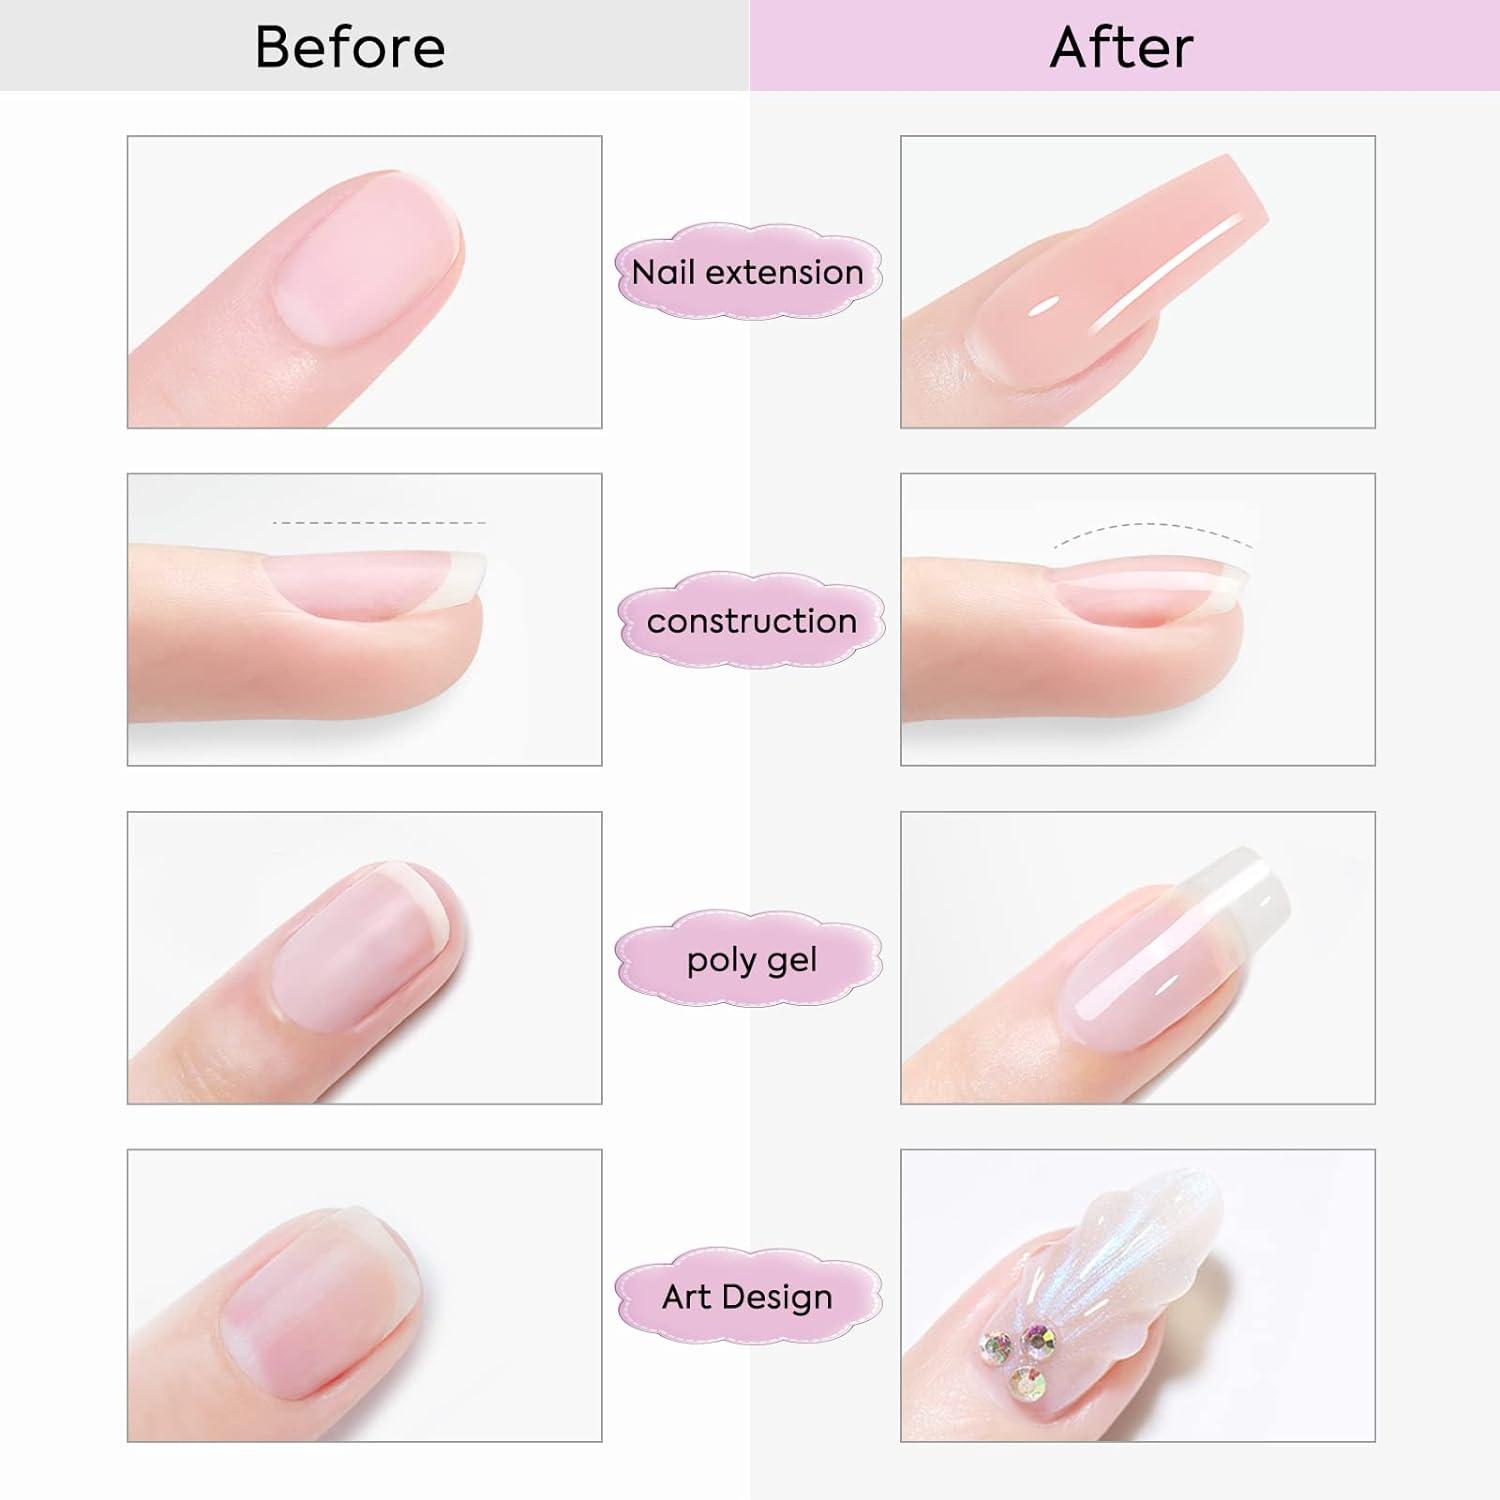 Jelly Nail Designs For Younger-Looking Hands | Woman's World